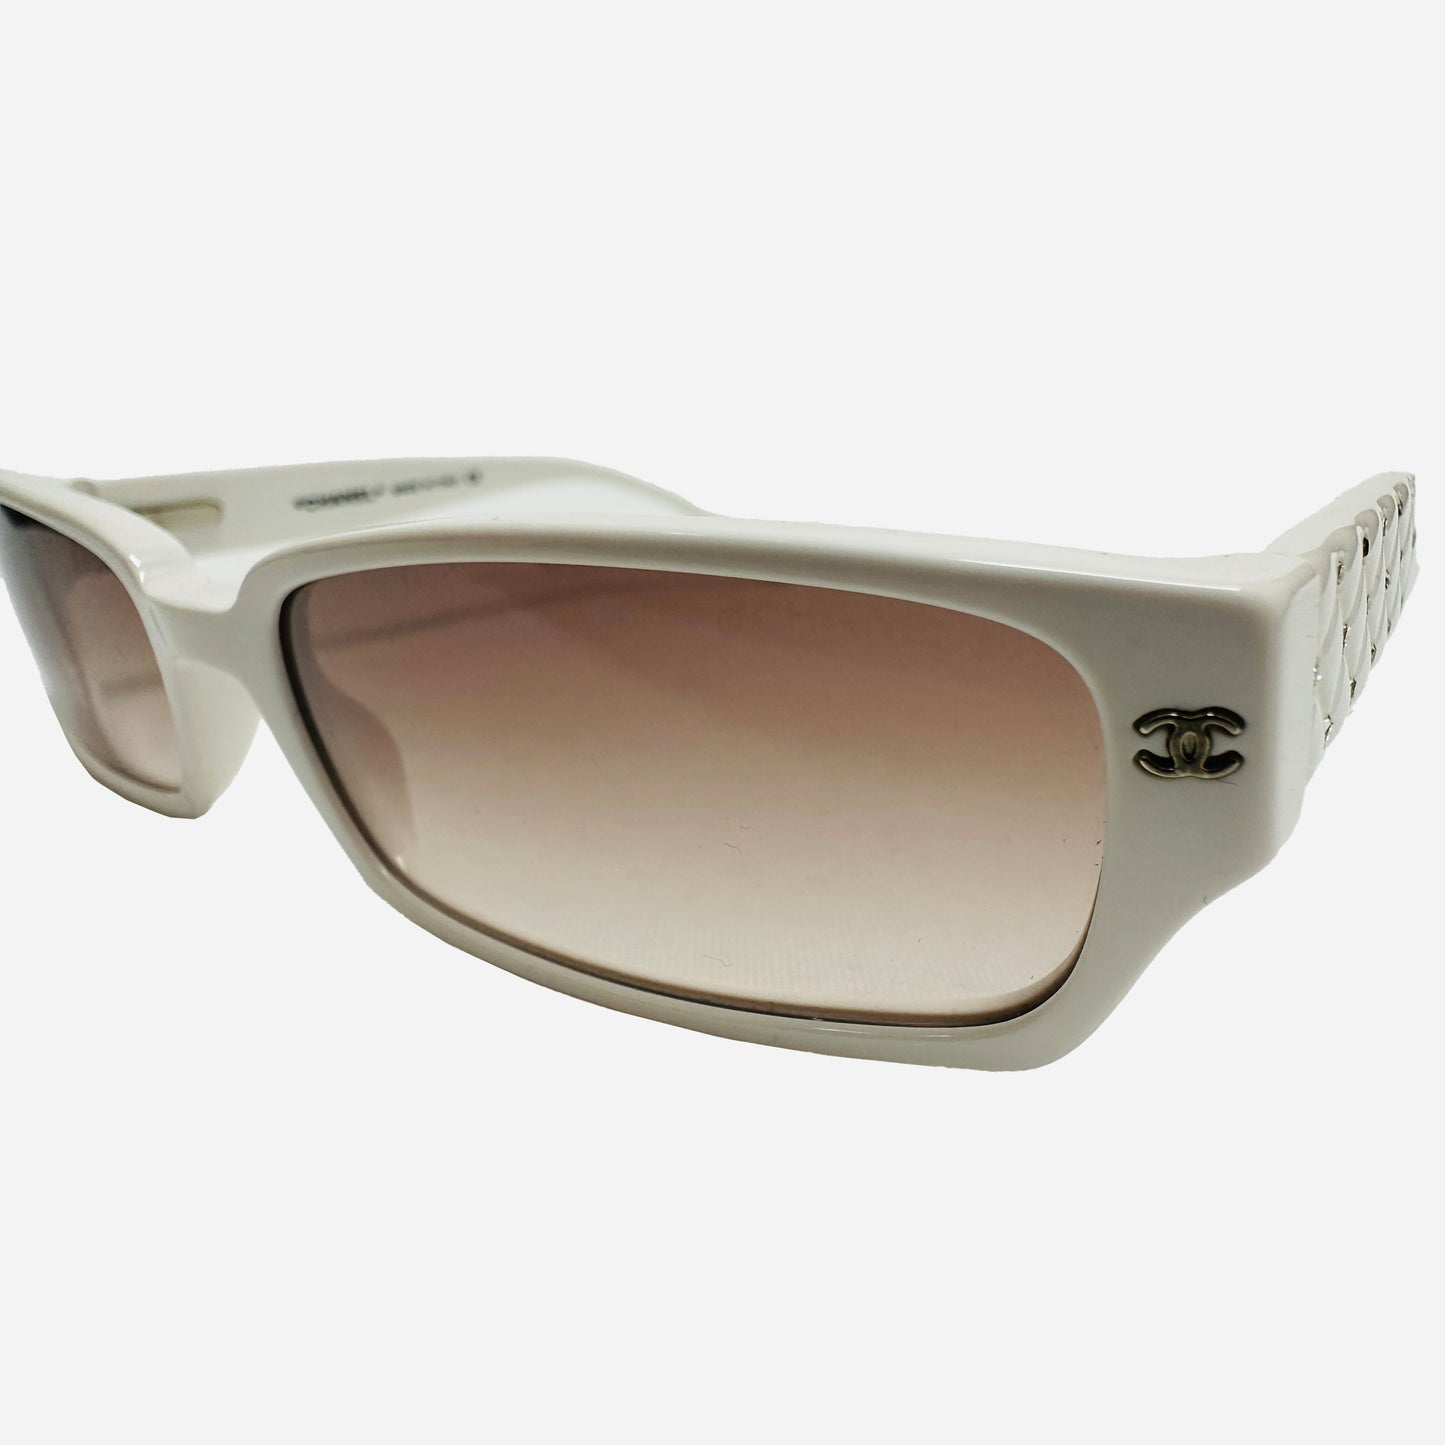 The-Seekers-Vintage-Coco-Chanel-Sunglasses-Sonnenbrille-5058-front